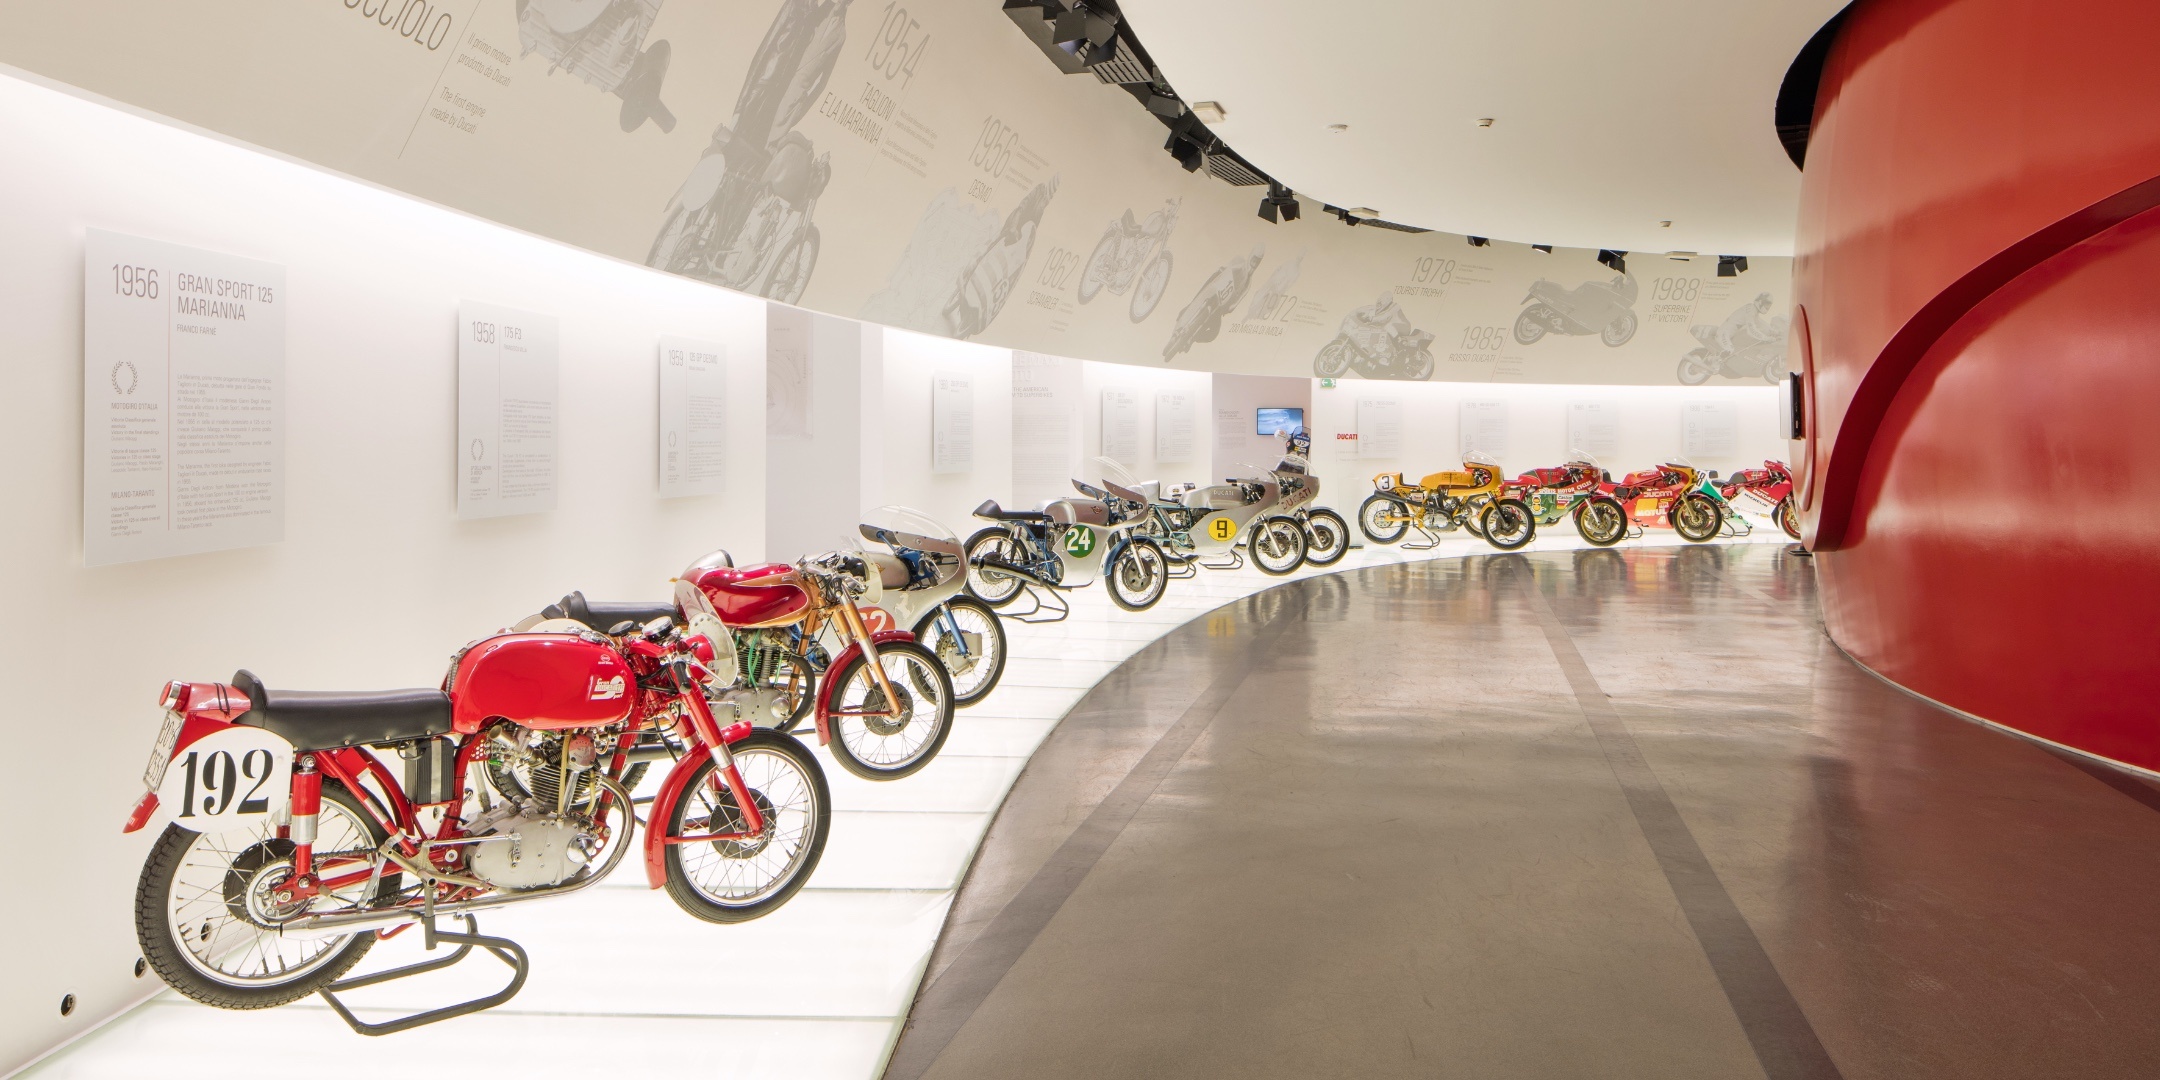 Ducati museum guided tour